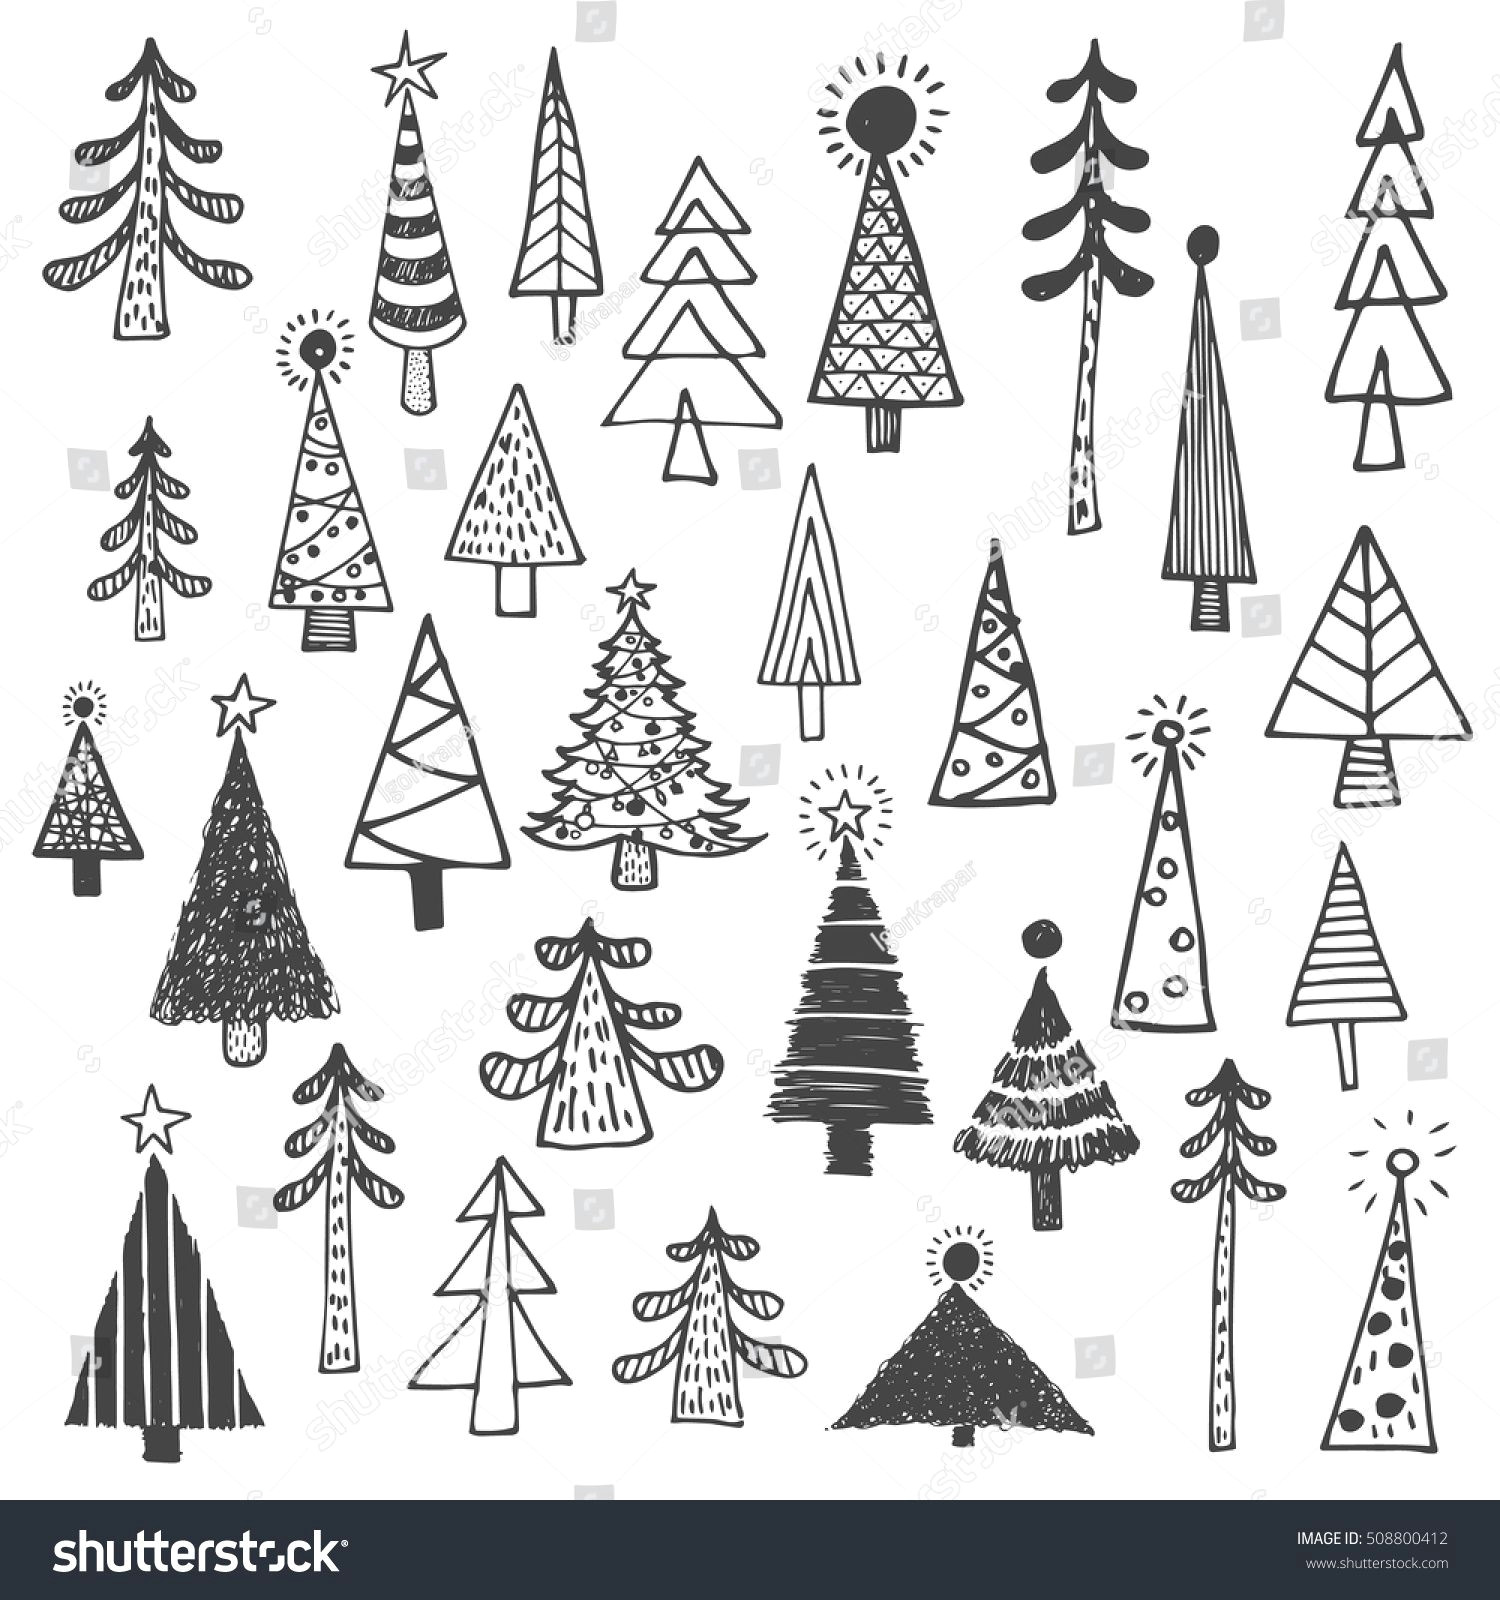 How to Draw A Pine Tree Easy Christmas Tree White Spruce Fir Fir Tree Simple Drawing Set